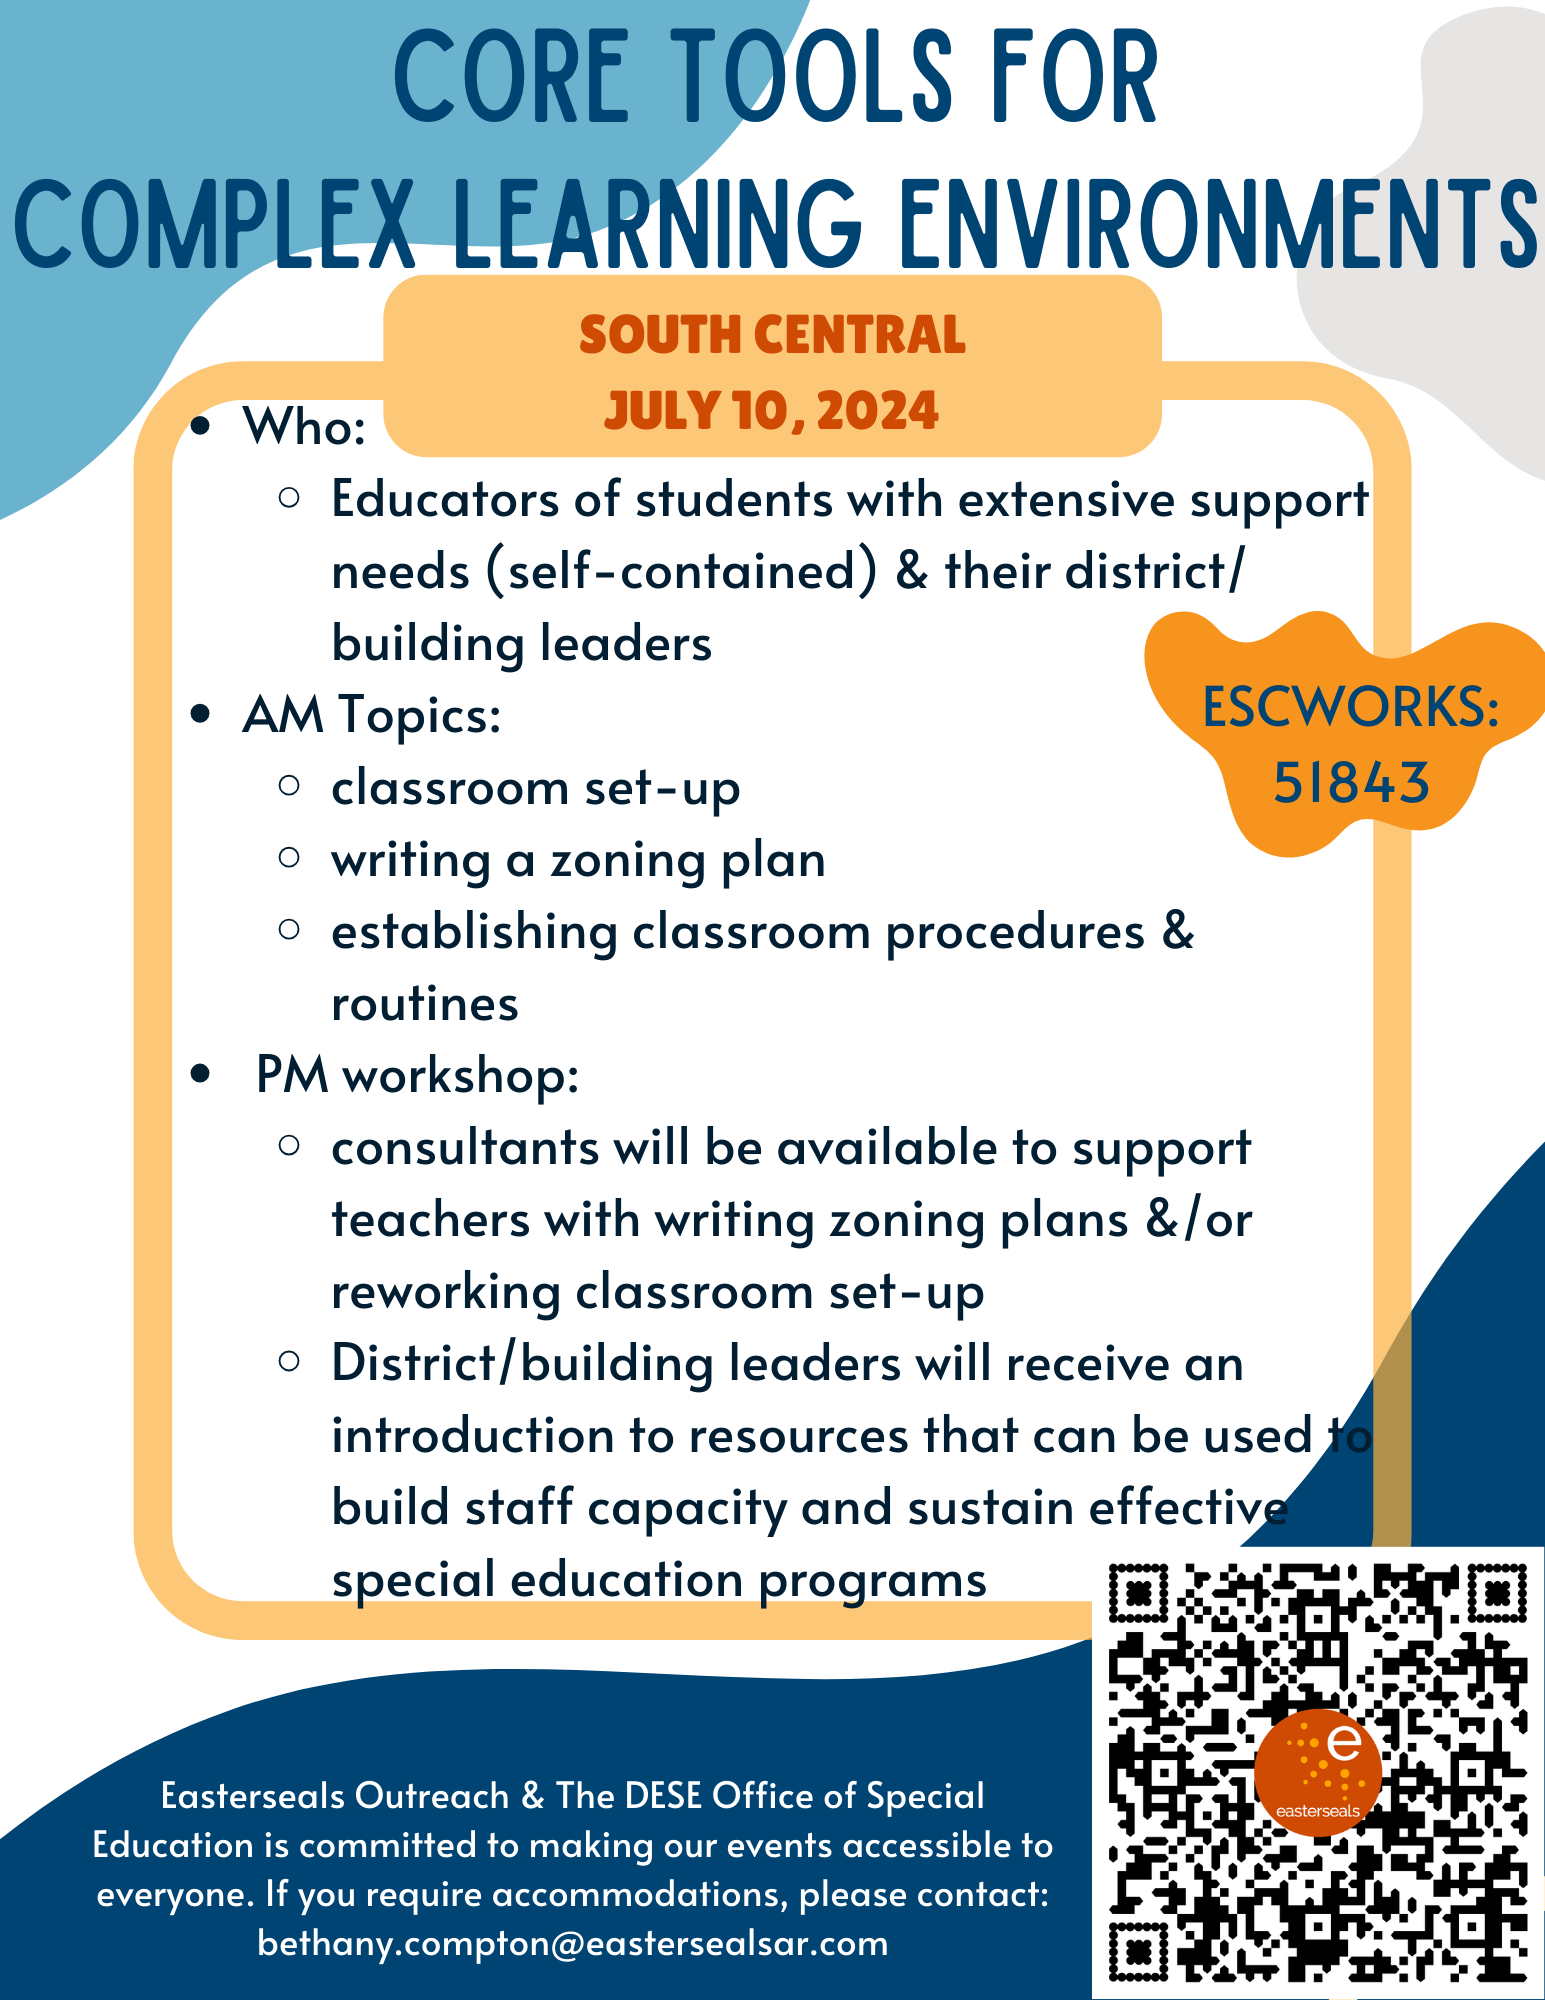 Core Tools for Complex Learning Environments